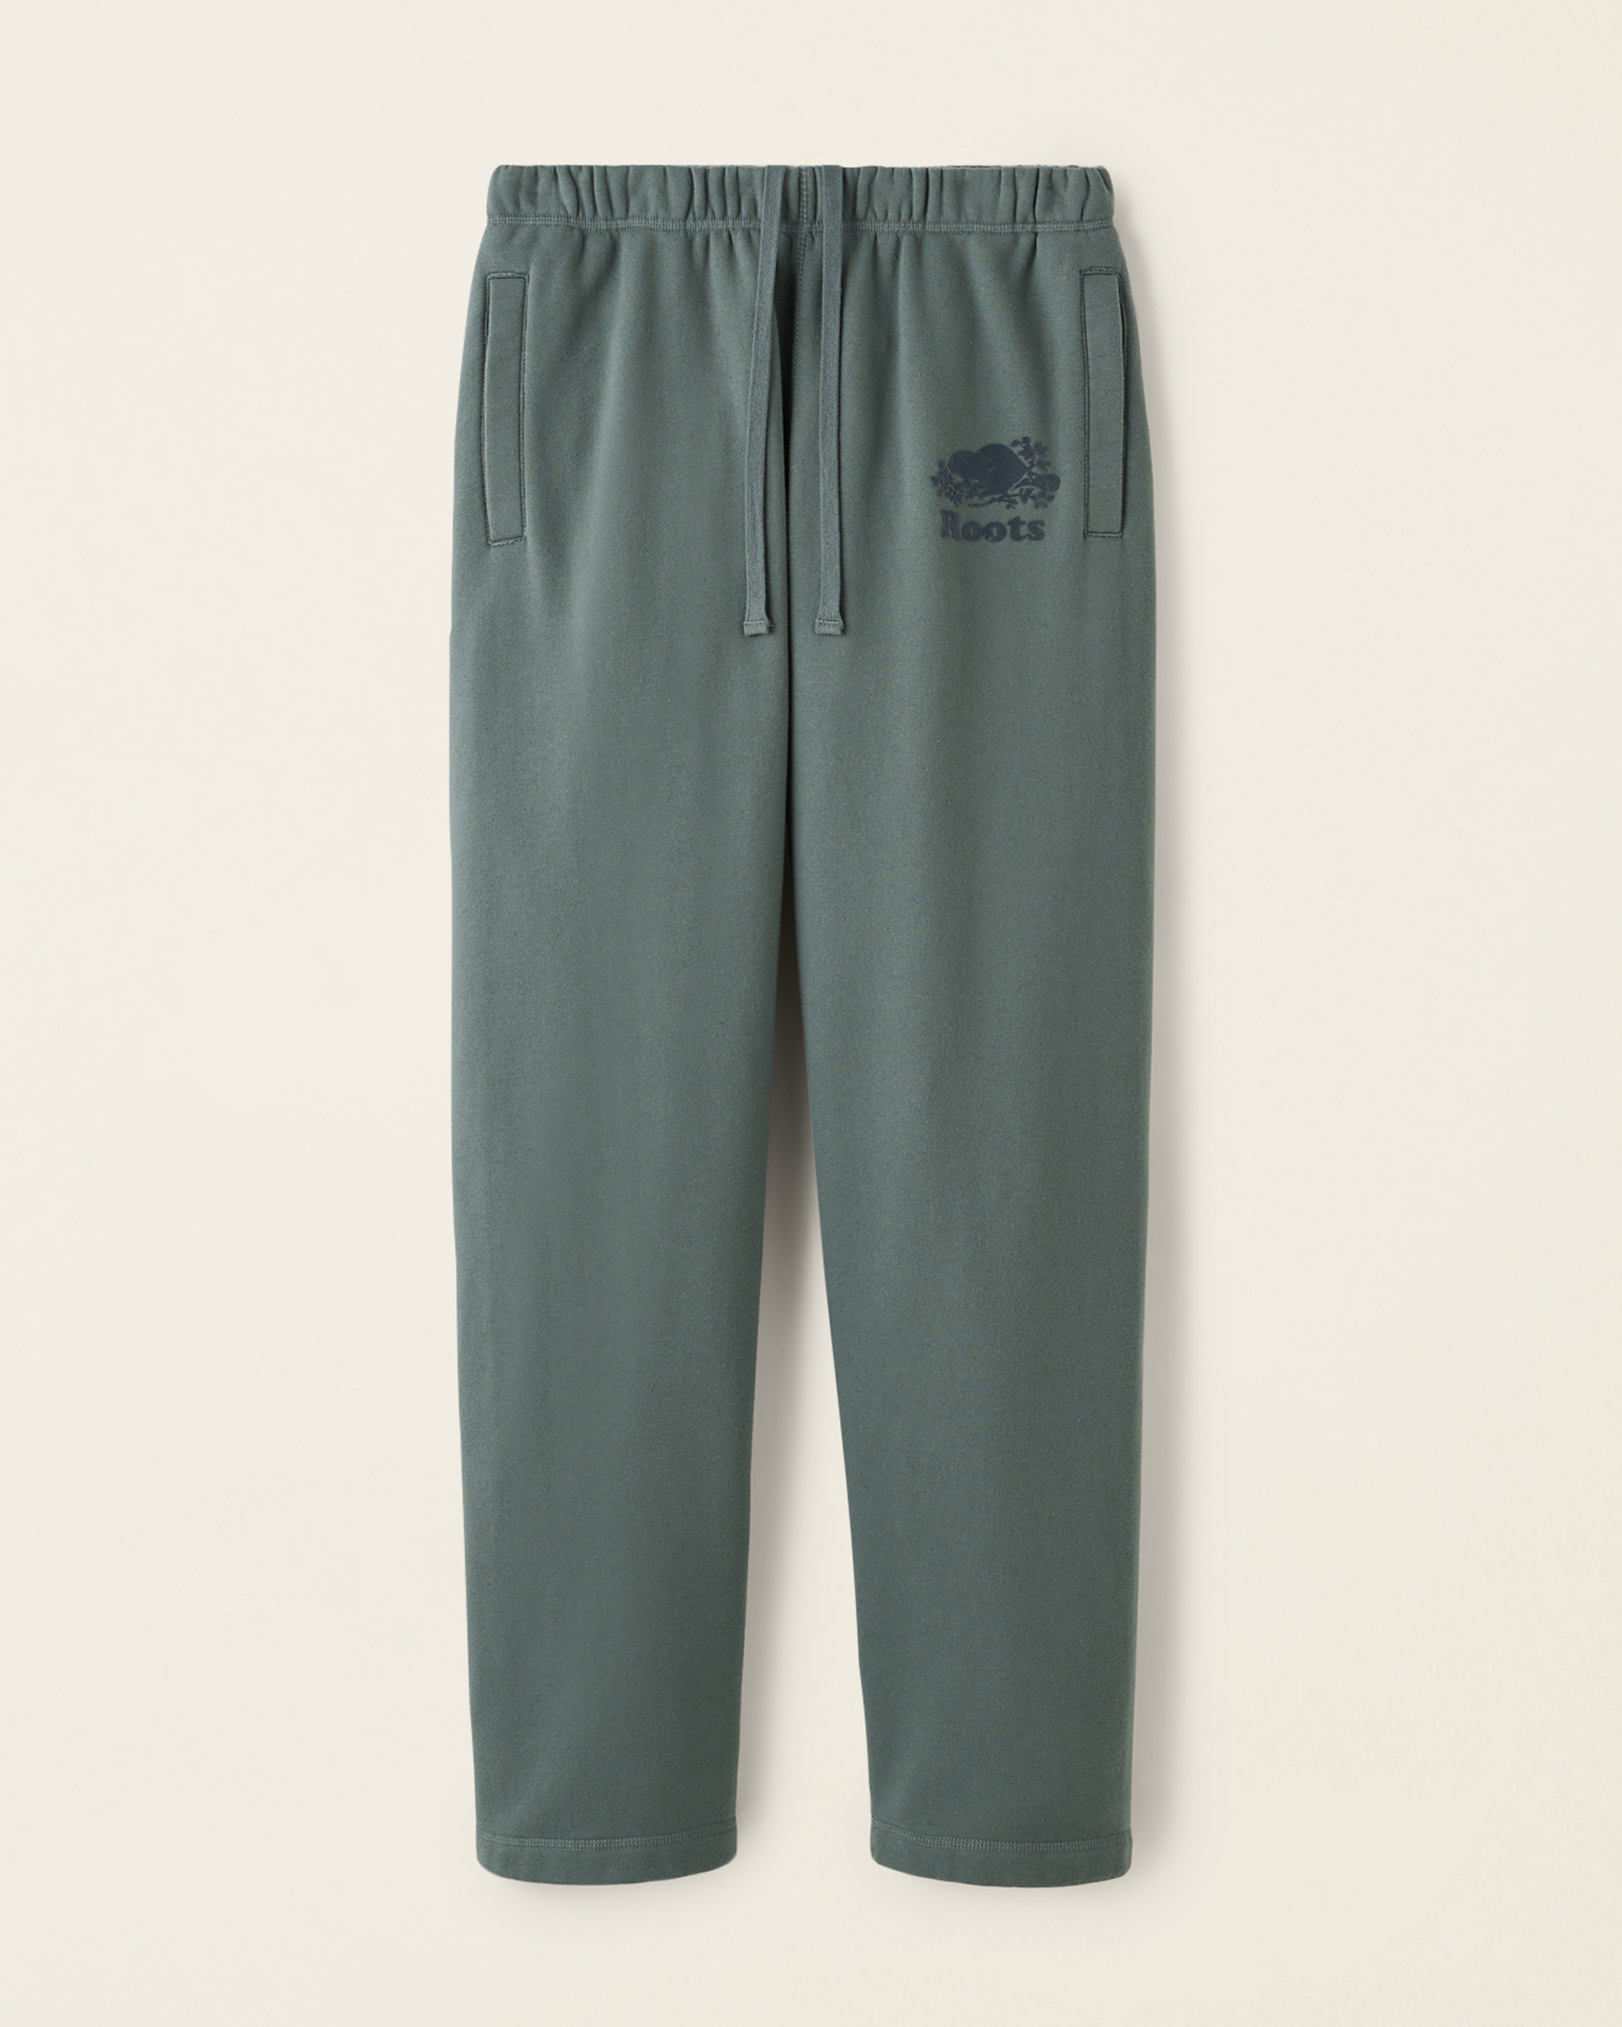 Roots Organic Heritage Sweatpant in Balsam Green